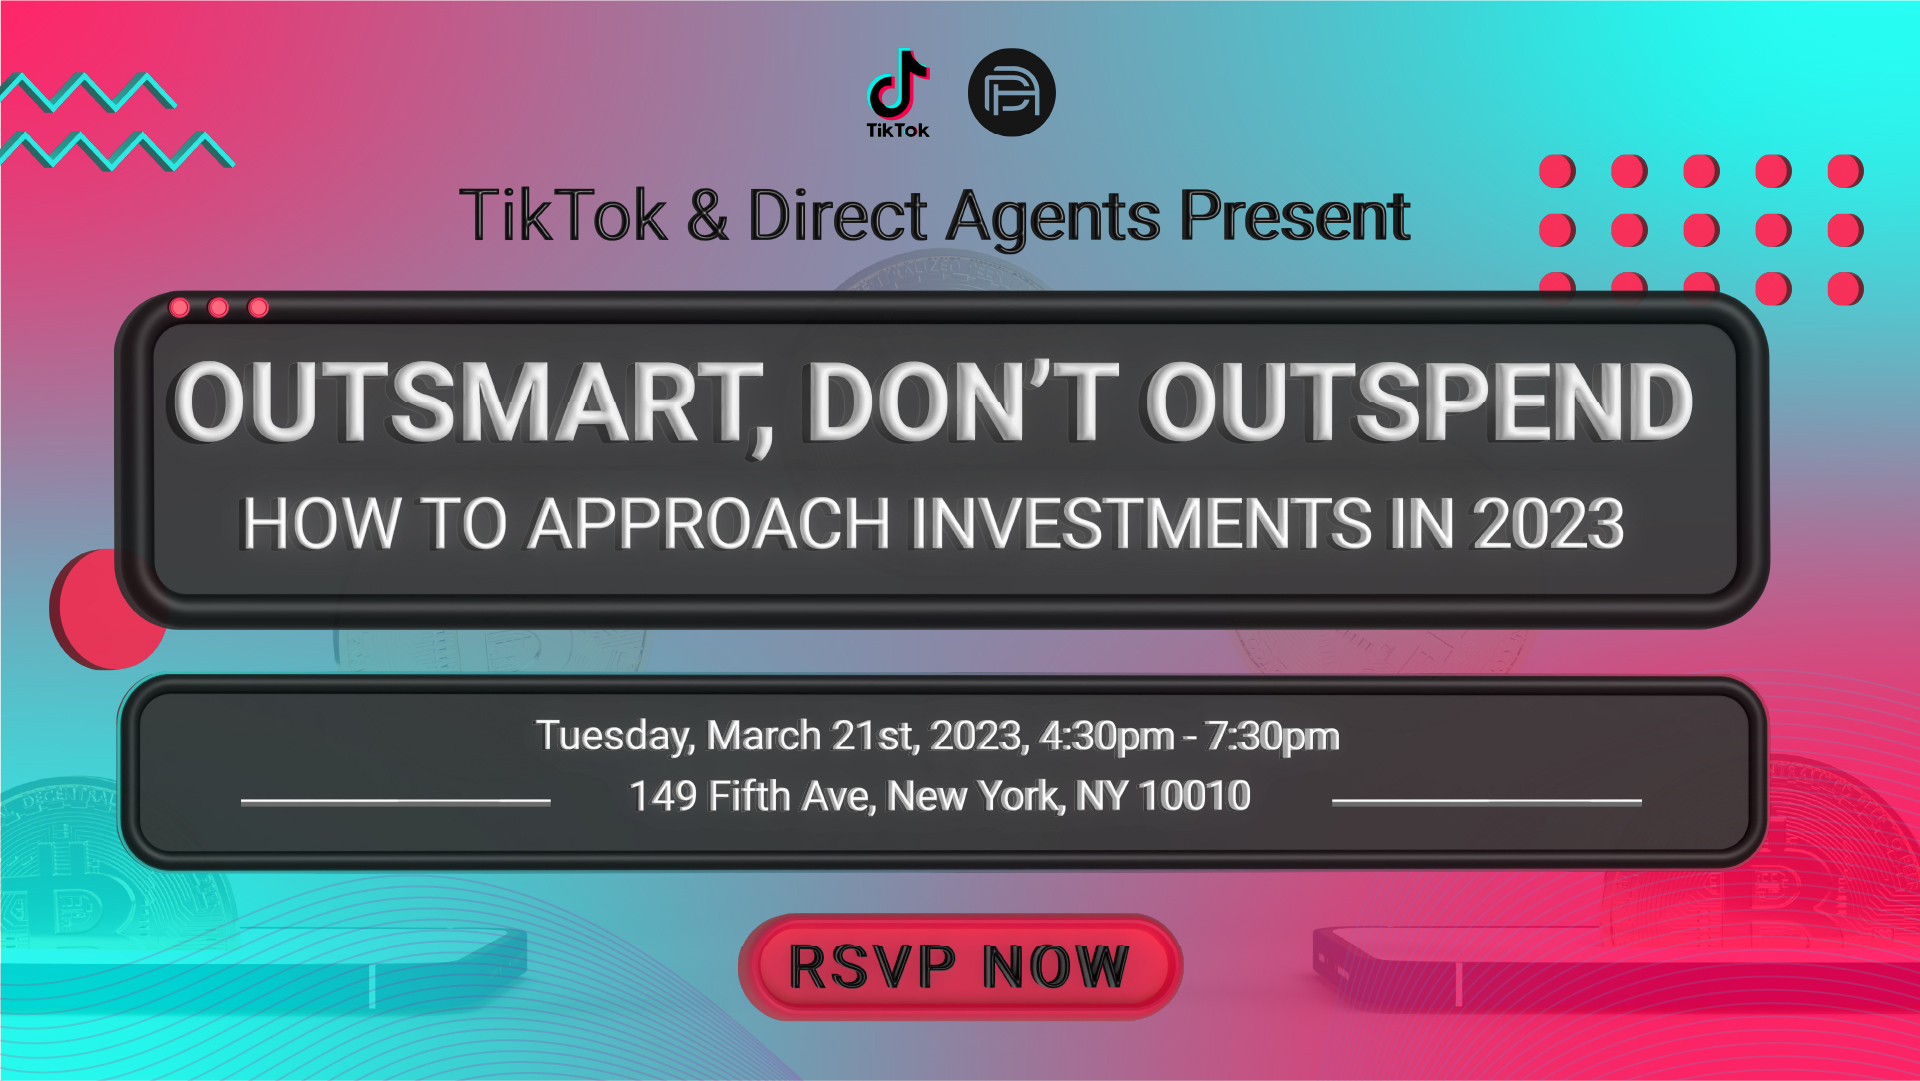 TikTok & Direct Agents Present “Outsmart, Don’t Outspend: How to Approach Investments in 2023”